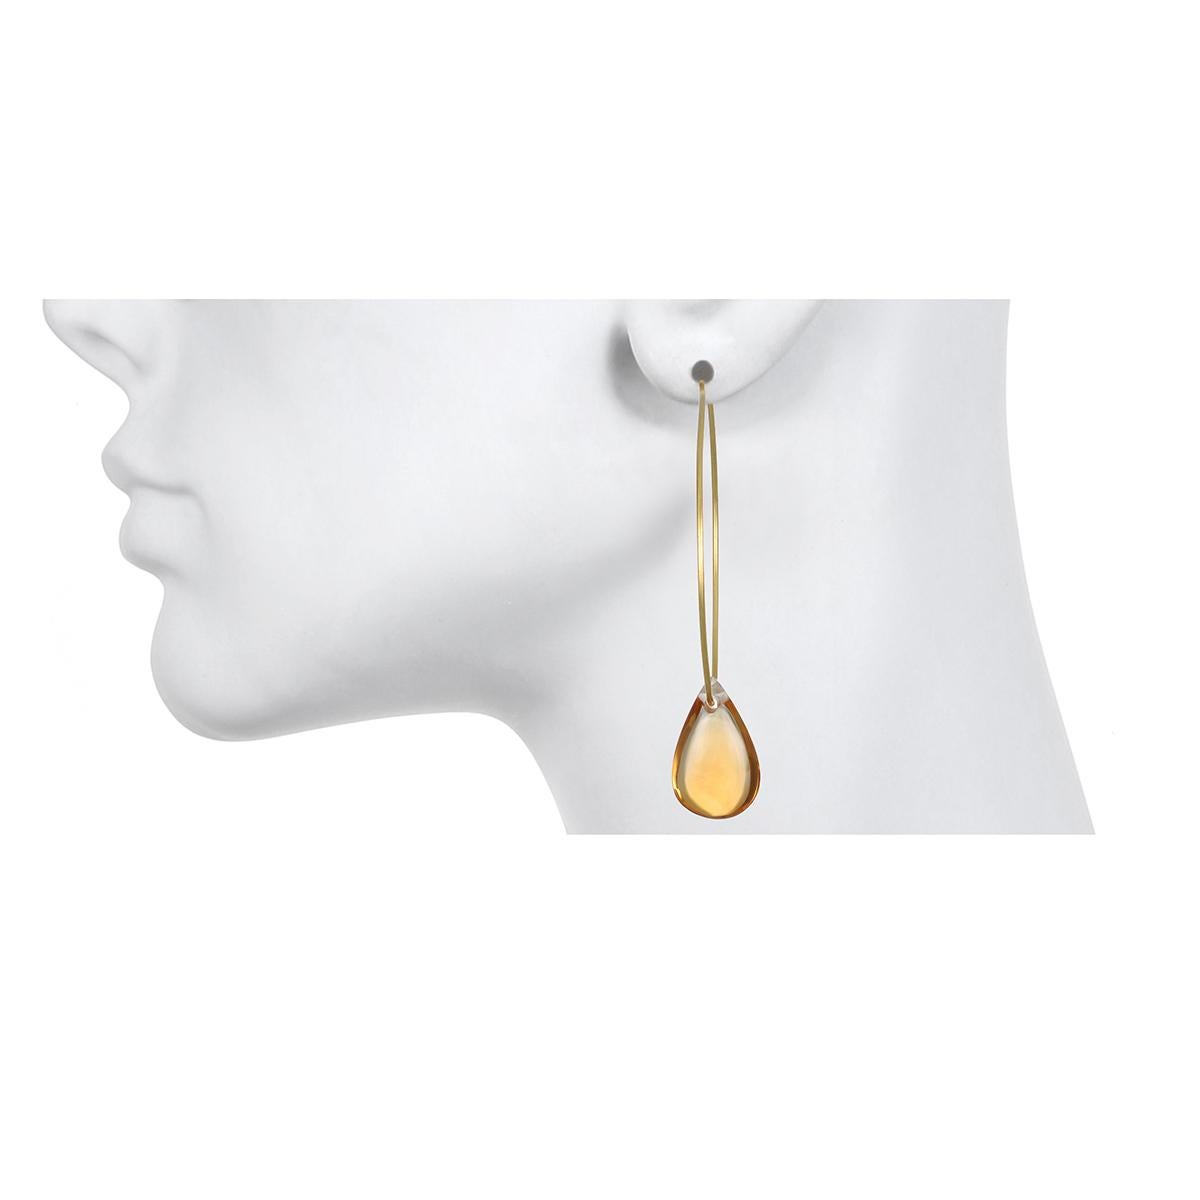 Faye Kim 18 Karat Wire Hoops with Citrine Briolette Drops

Smooth Citrine briolettes float through Faye's 18k gold wire hoops.  These gorgeous gemstones have a warm, golden hue and look great from every angle.   

Hoops: 1.75